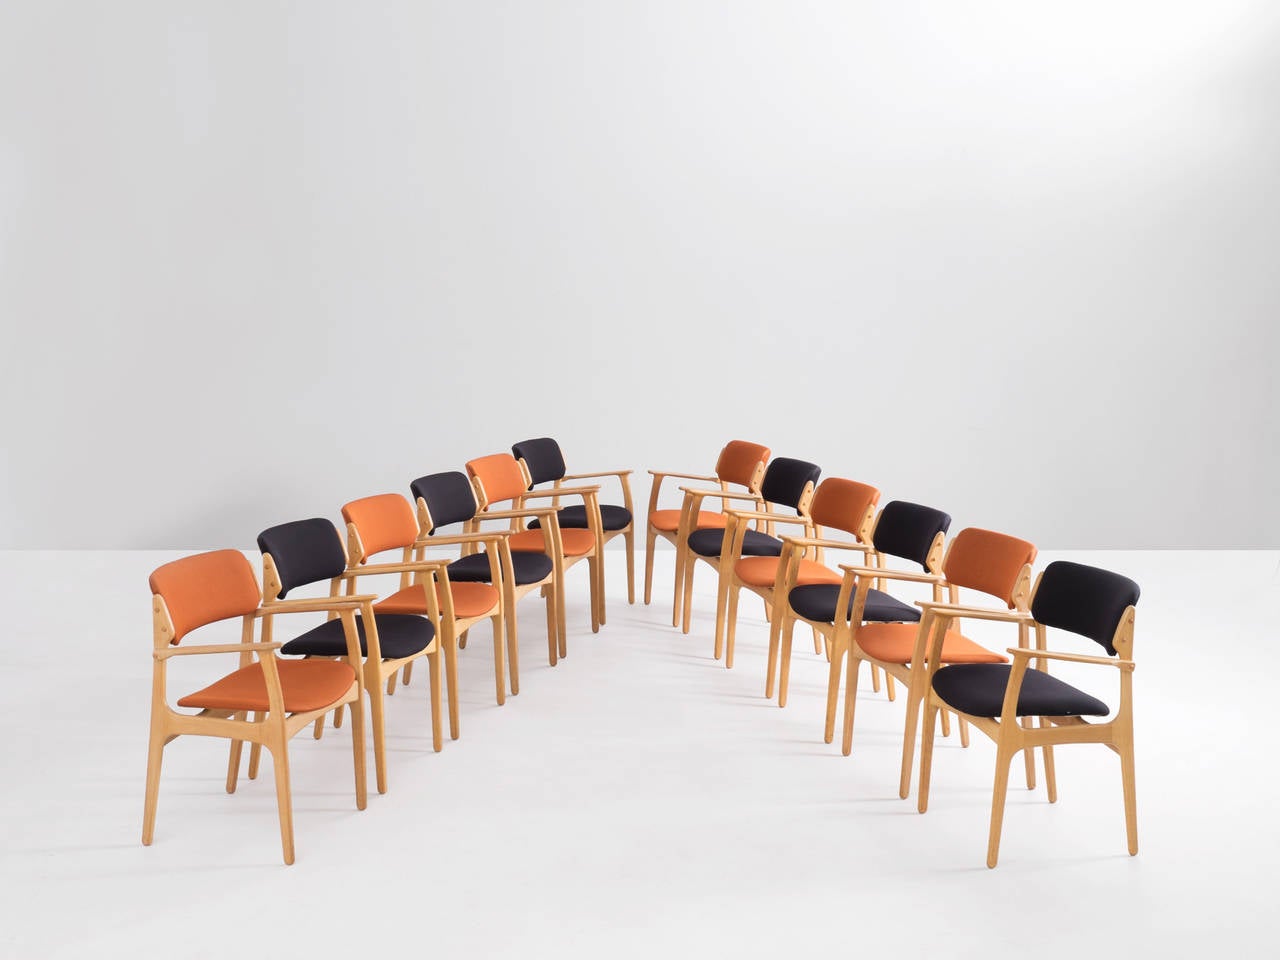 Large set of 12 dining chairs in oak wood by Erik Buck, Denmark, 1950s.

The chairs show elegant lines and stunning wood connections.
This set of ten, best known as 'model 50', are reupholstered in high quality fabric.

Solid construction with